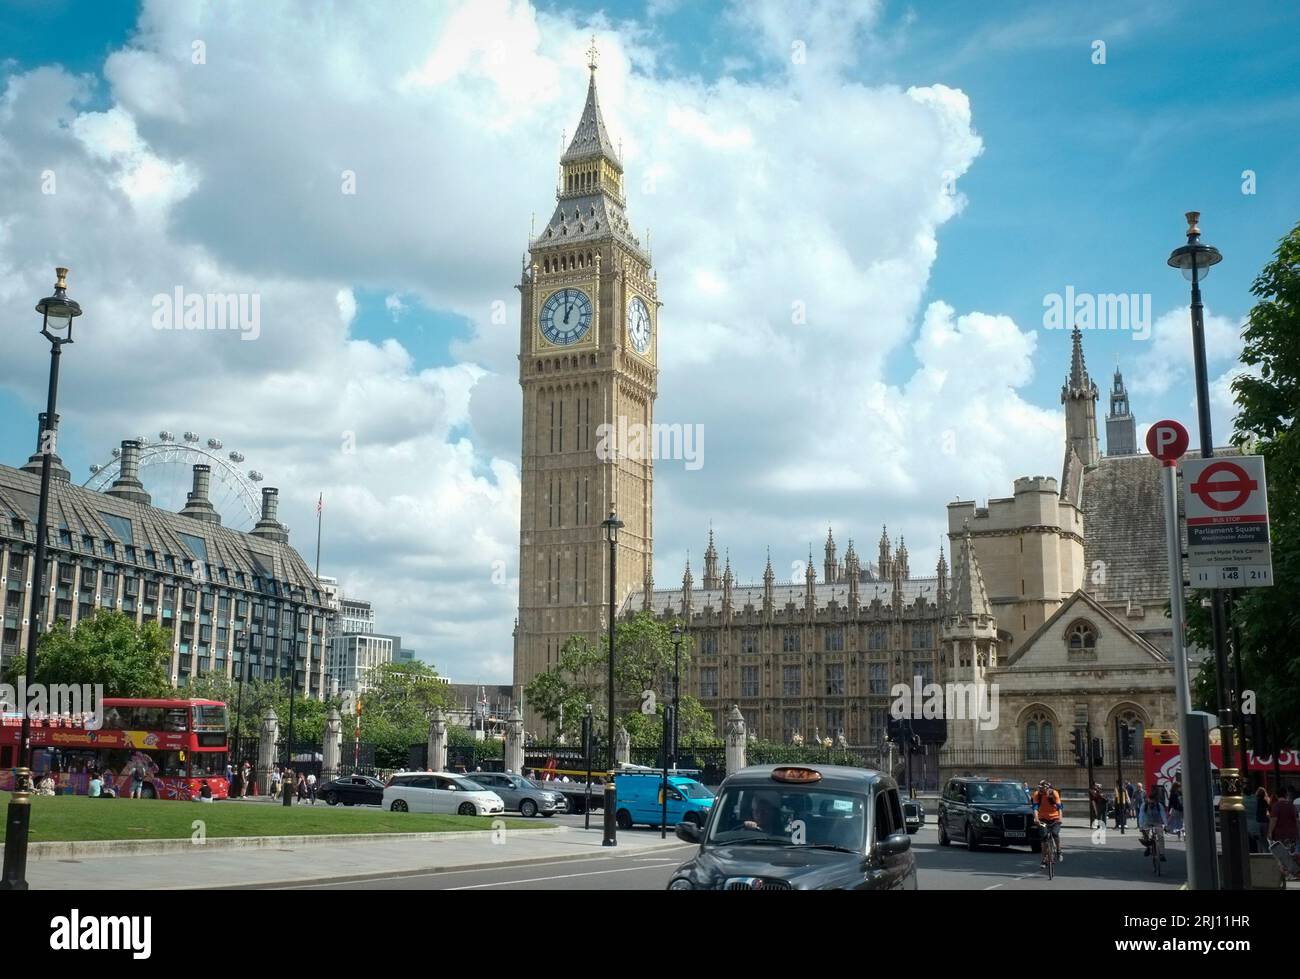 Big Ben and Elizabeth Tower , the houses of Parliament, Palace of westminster, Parliament square, london UK Stock Photo